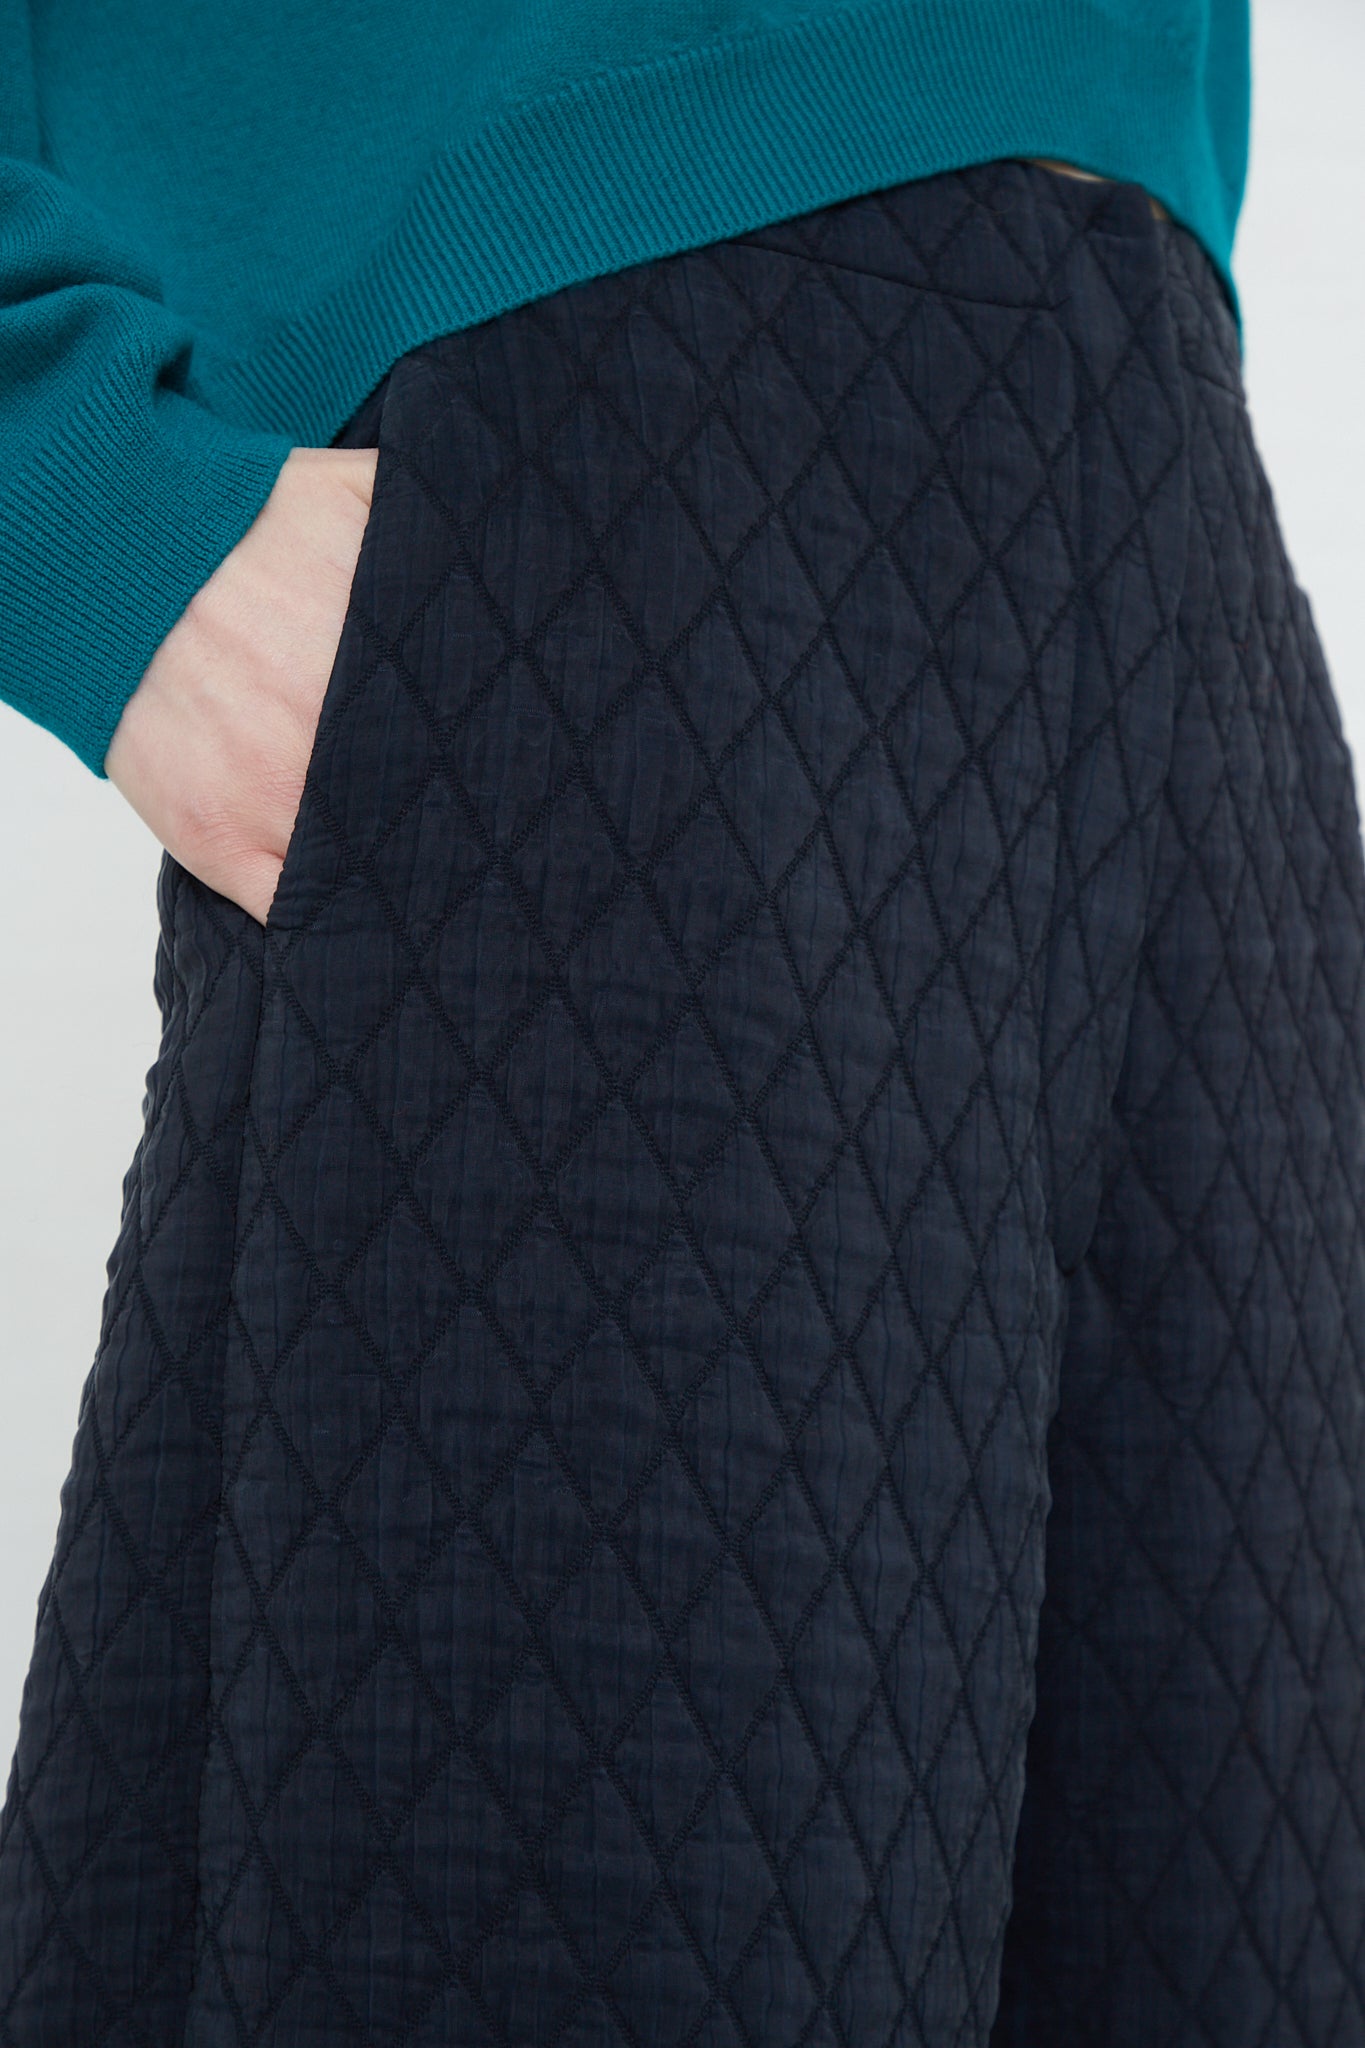 A woman wearing Cordera high-rise black Quilted Curved Pants with an elasticated waist and a teal sweater made from recycled polyester.